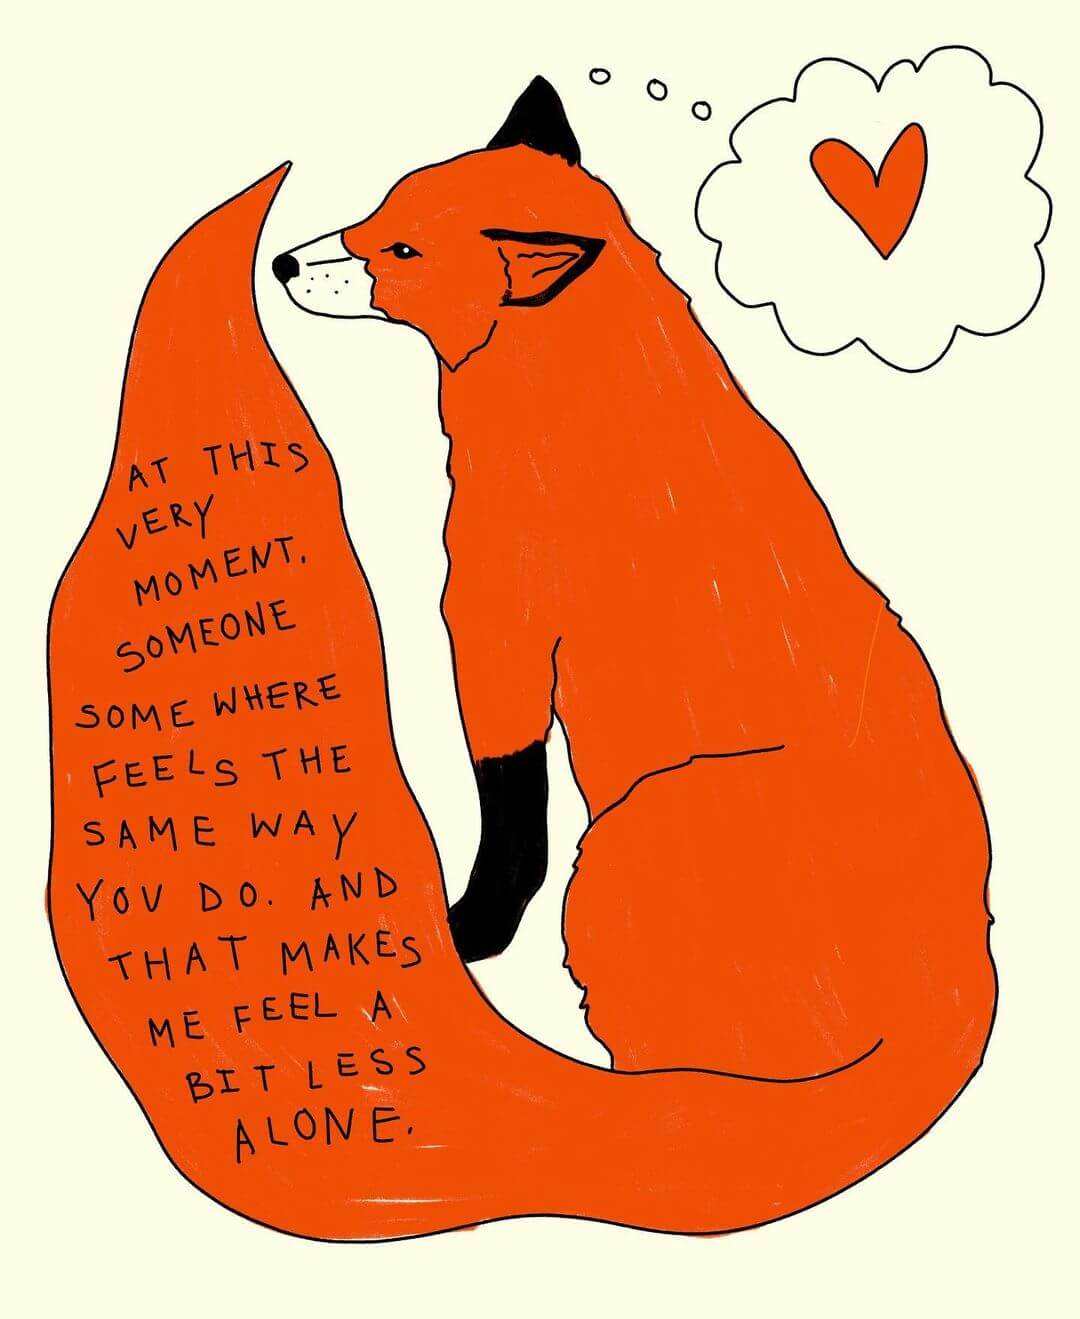 Illustration by Elena Fiorenza. A sitting fox has a thinking bubble with a heart inside and text on their tail reads, 'at this very moment, someone somewhere feels the same way you do. And that makes me feel a bit less alone.'